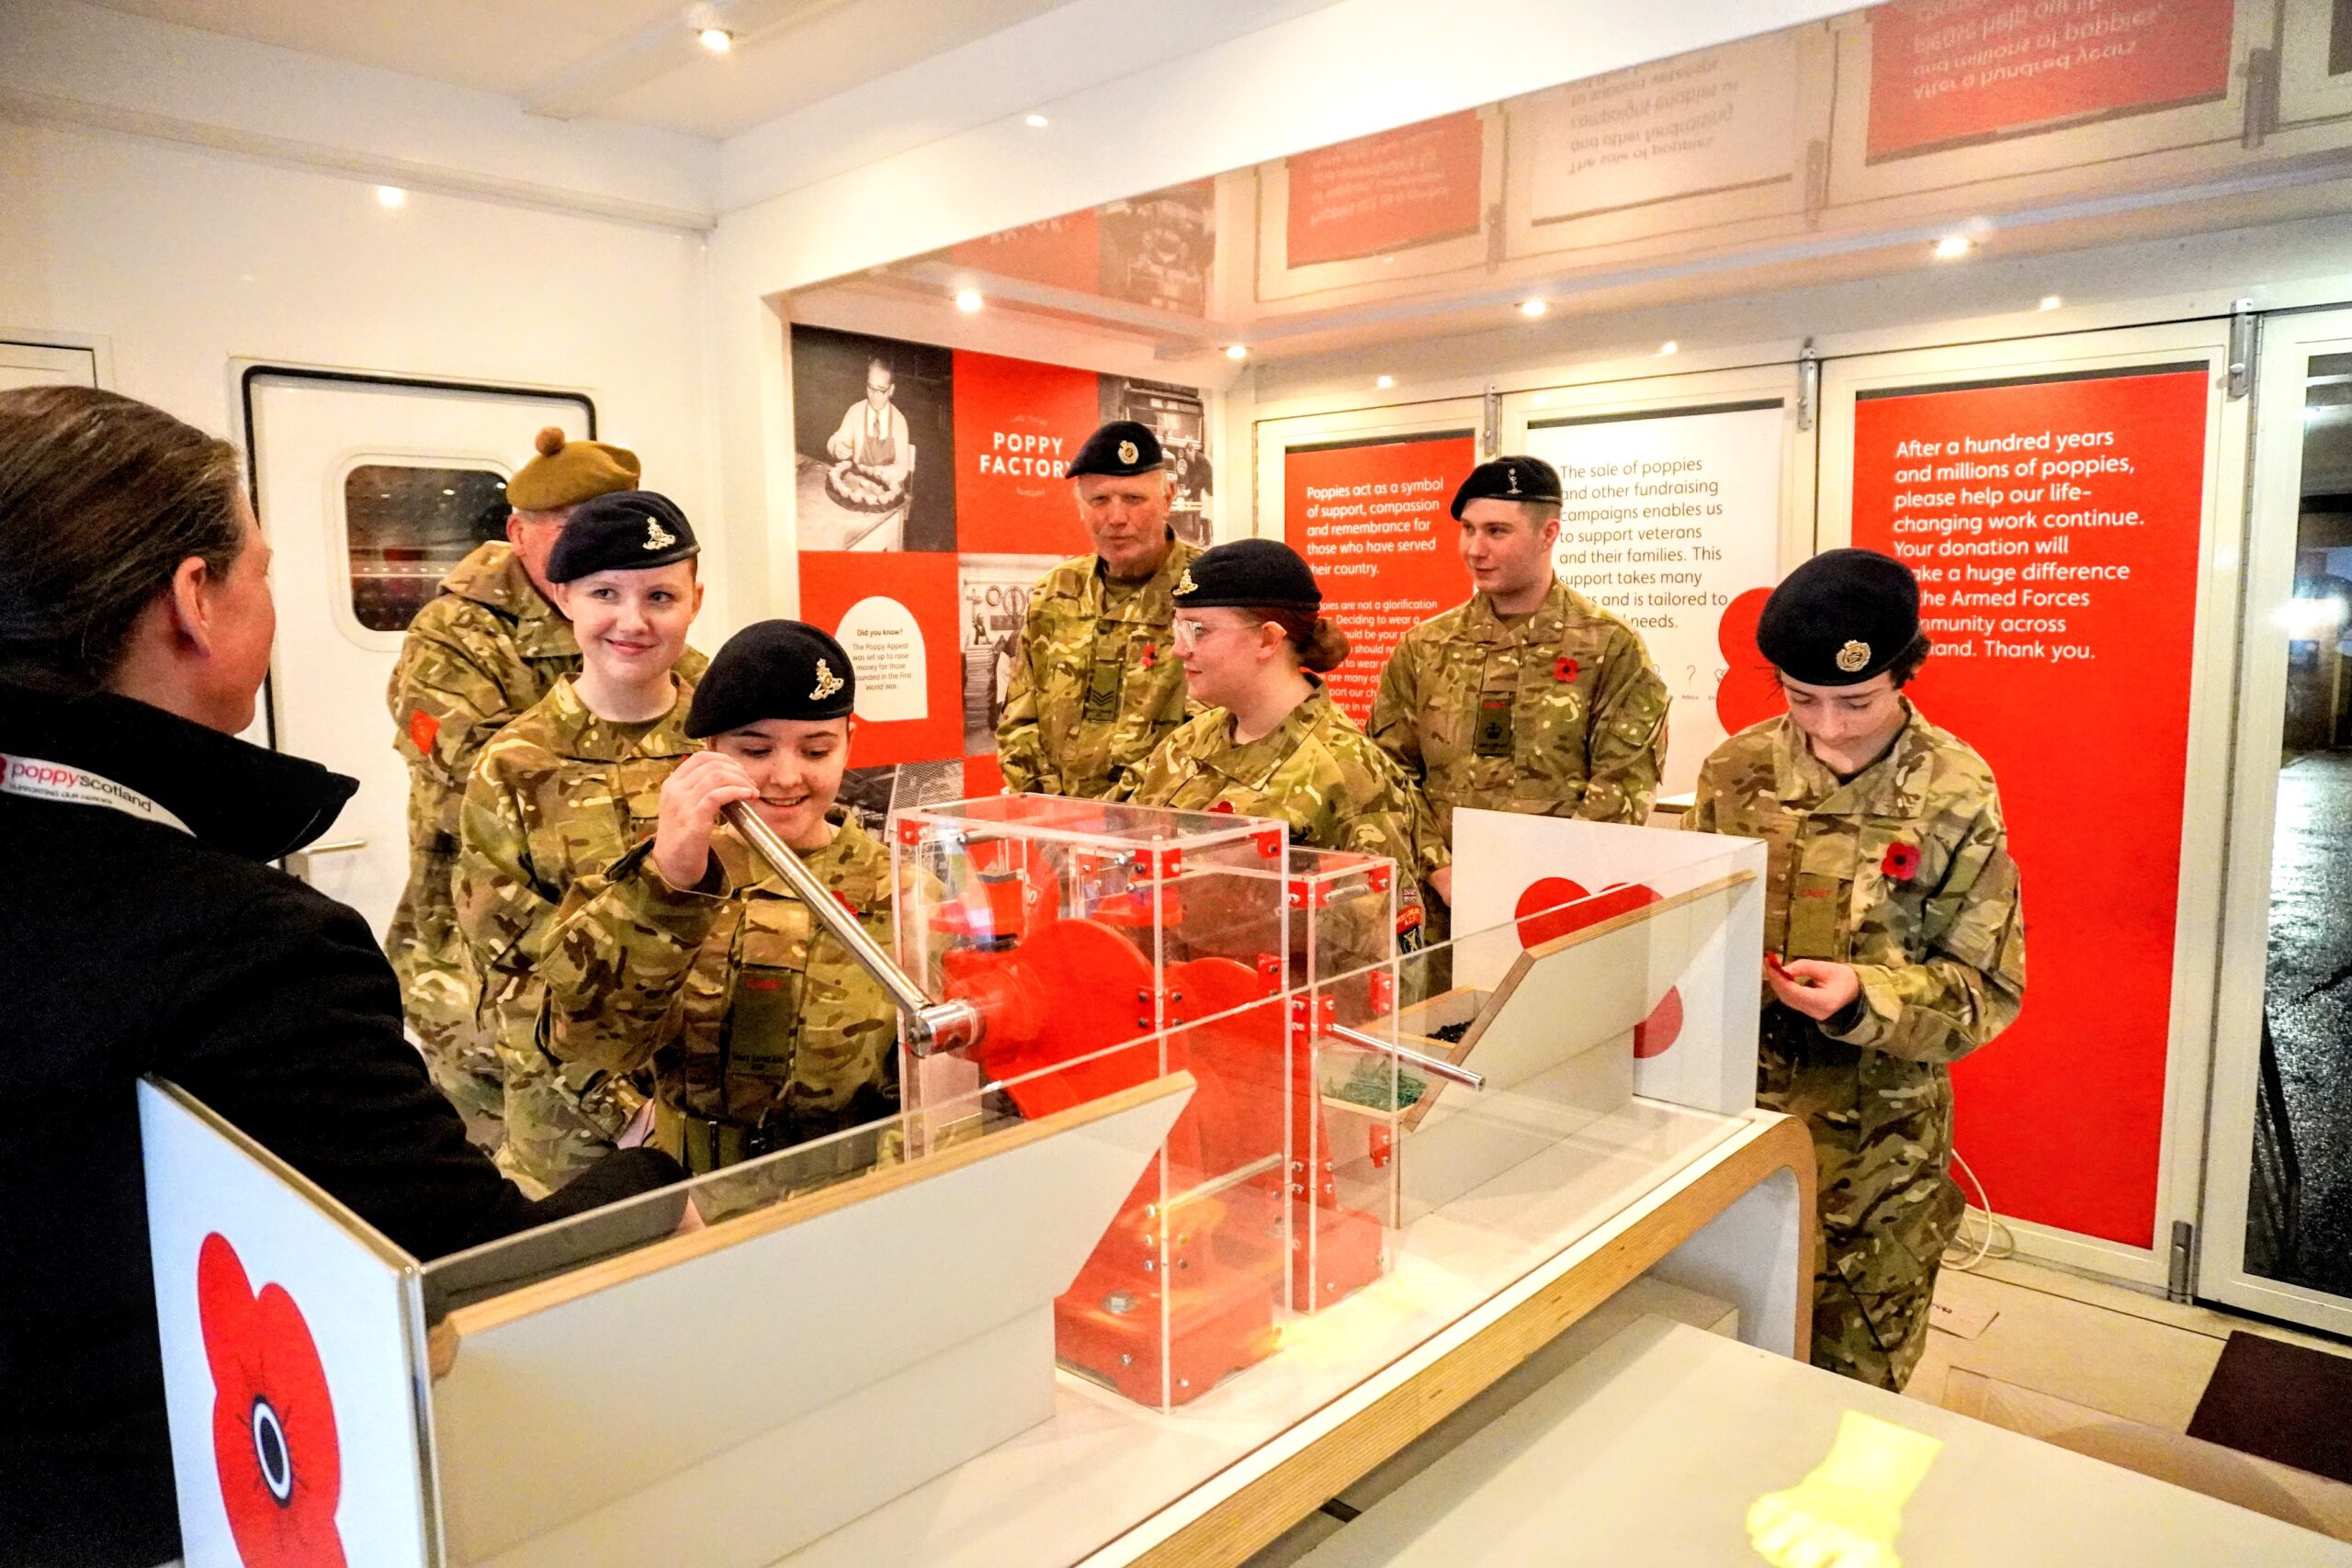 Learning and Outreach officer Catherine Provan instructs a group of Cadets how to make their own poppies.